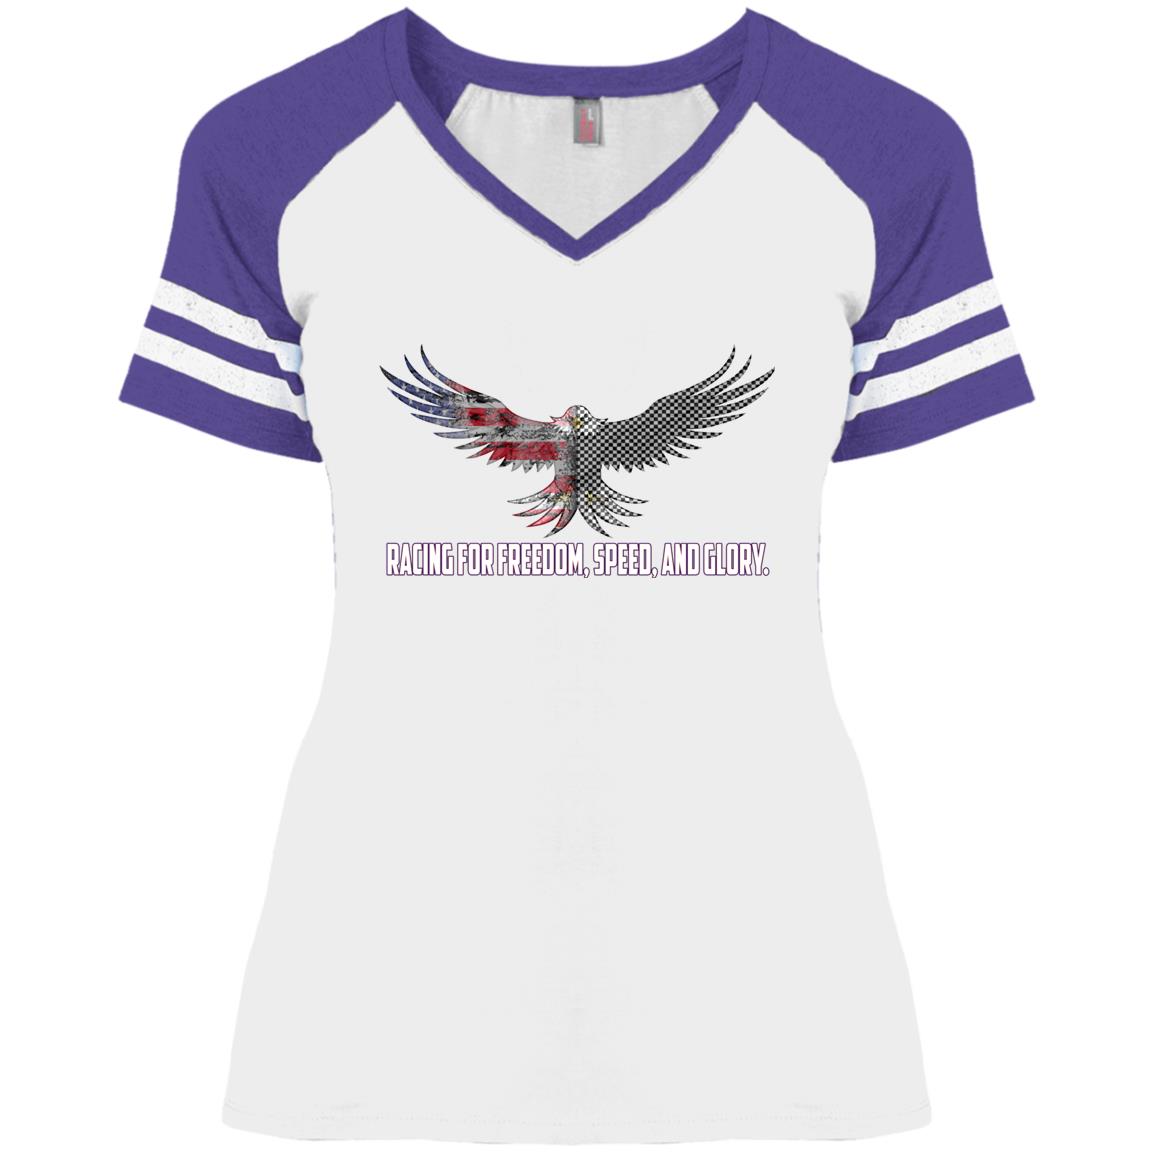 Racing For Freedom, Speed, And Glory Ladies' Game V-Neck T-Shirt